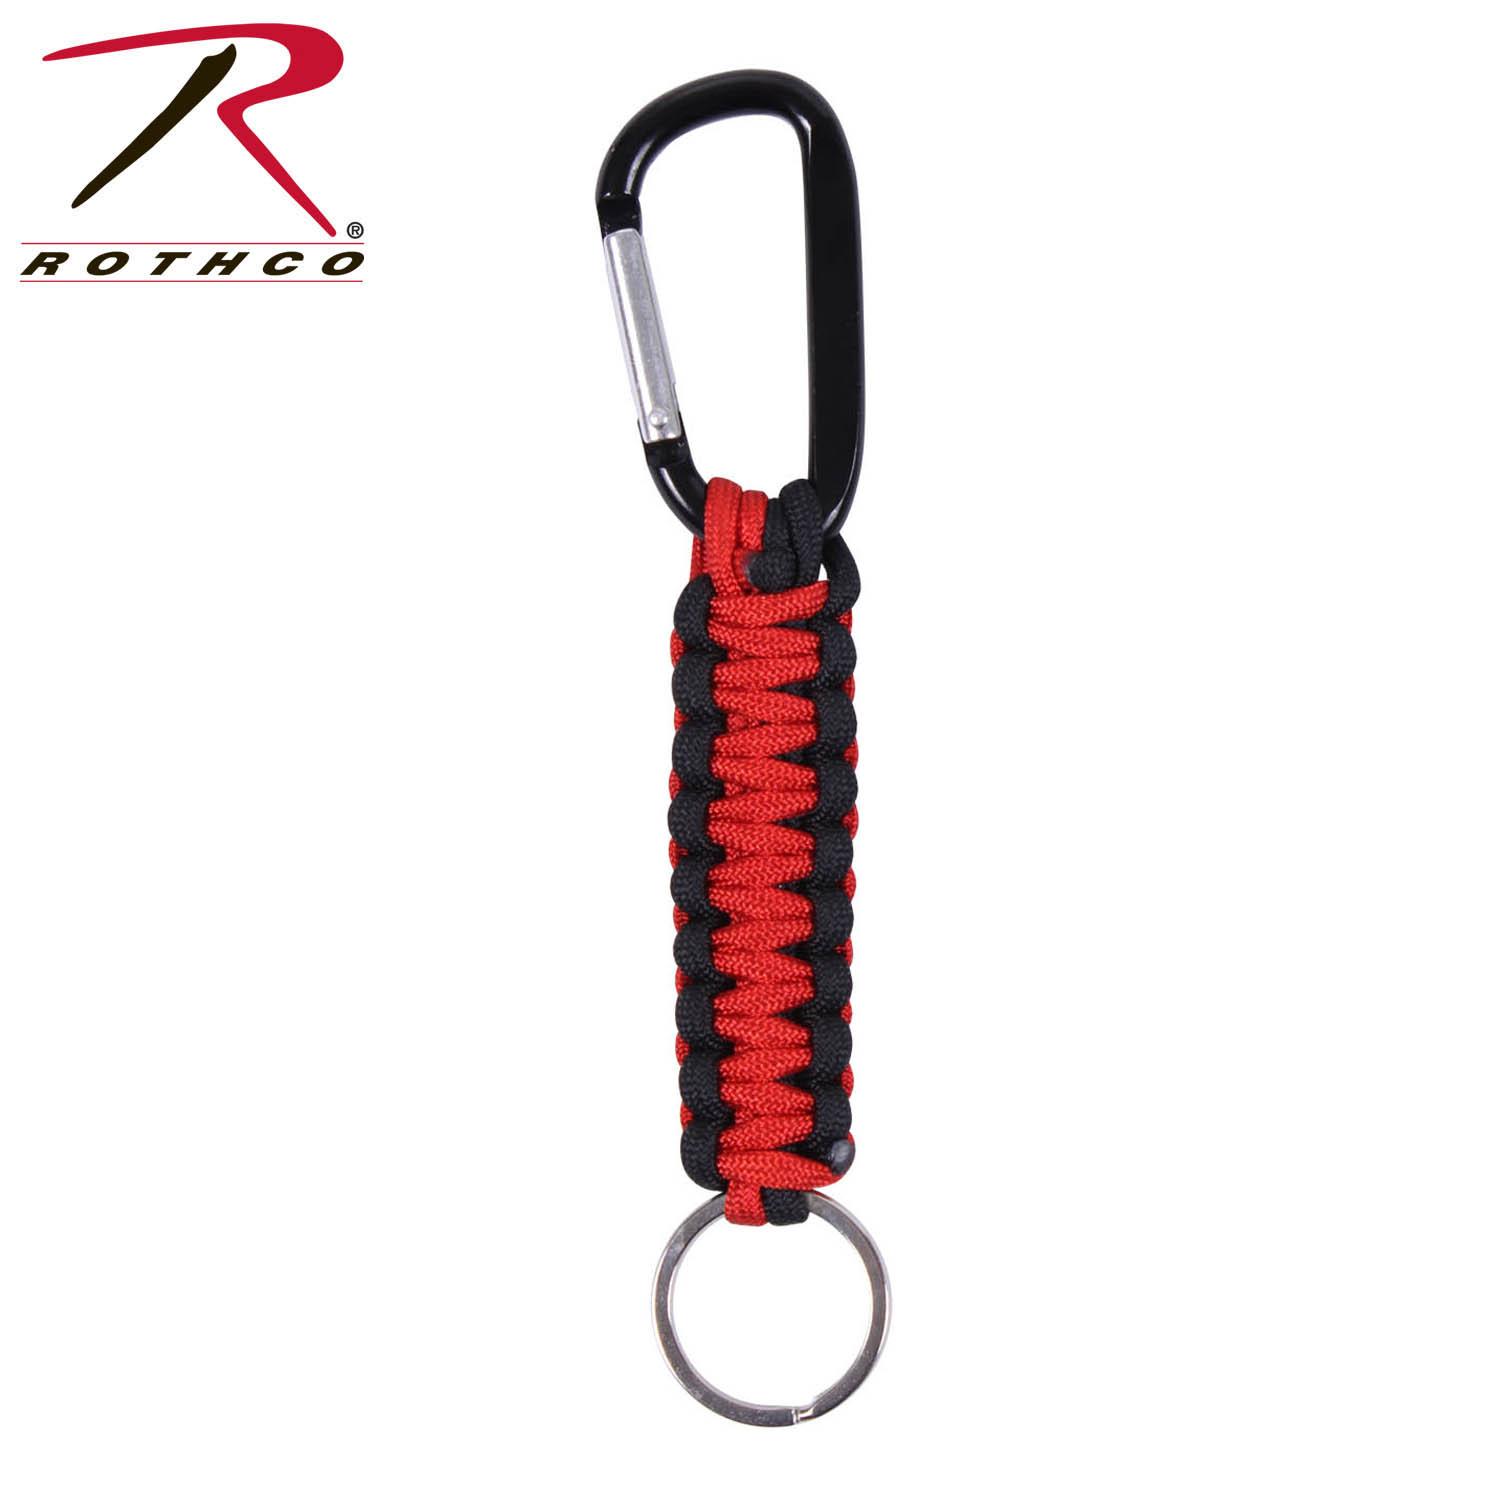 Thin red line paracord keychain w/carabiner - Ropes & paracords